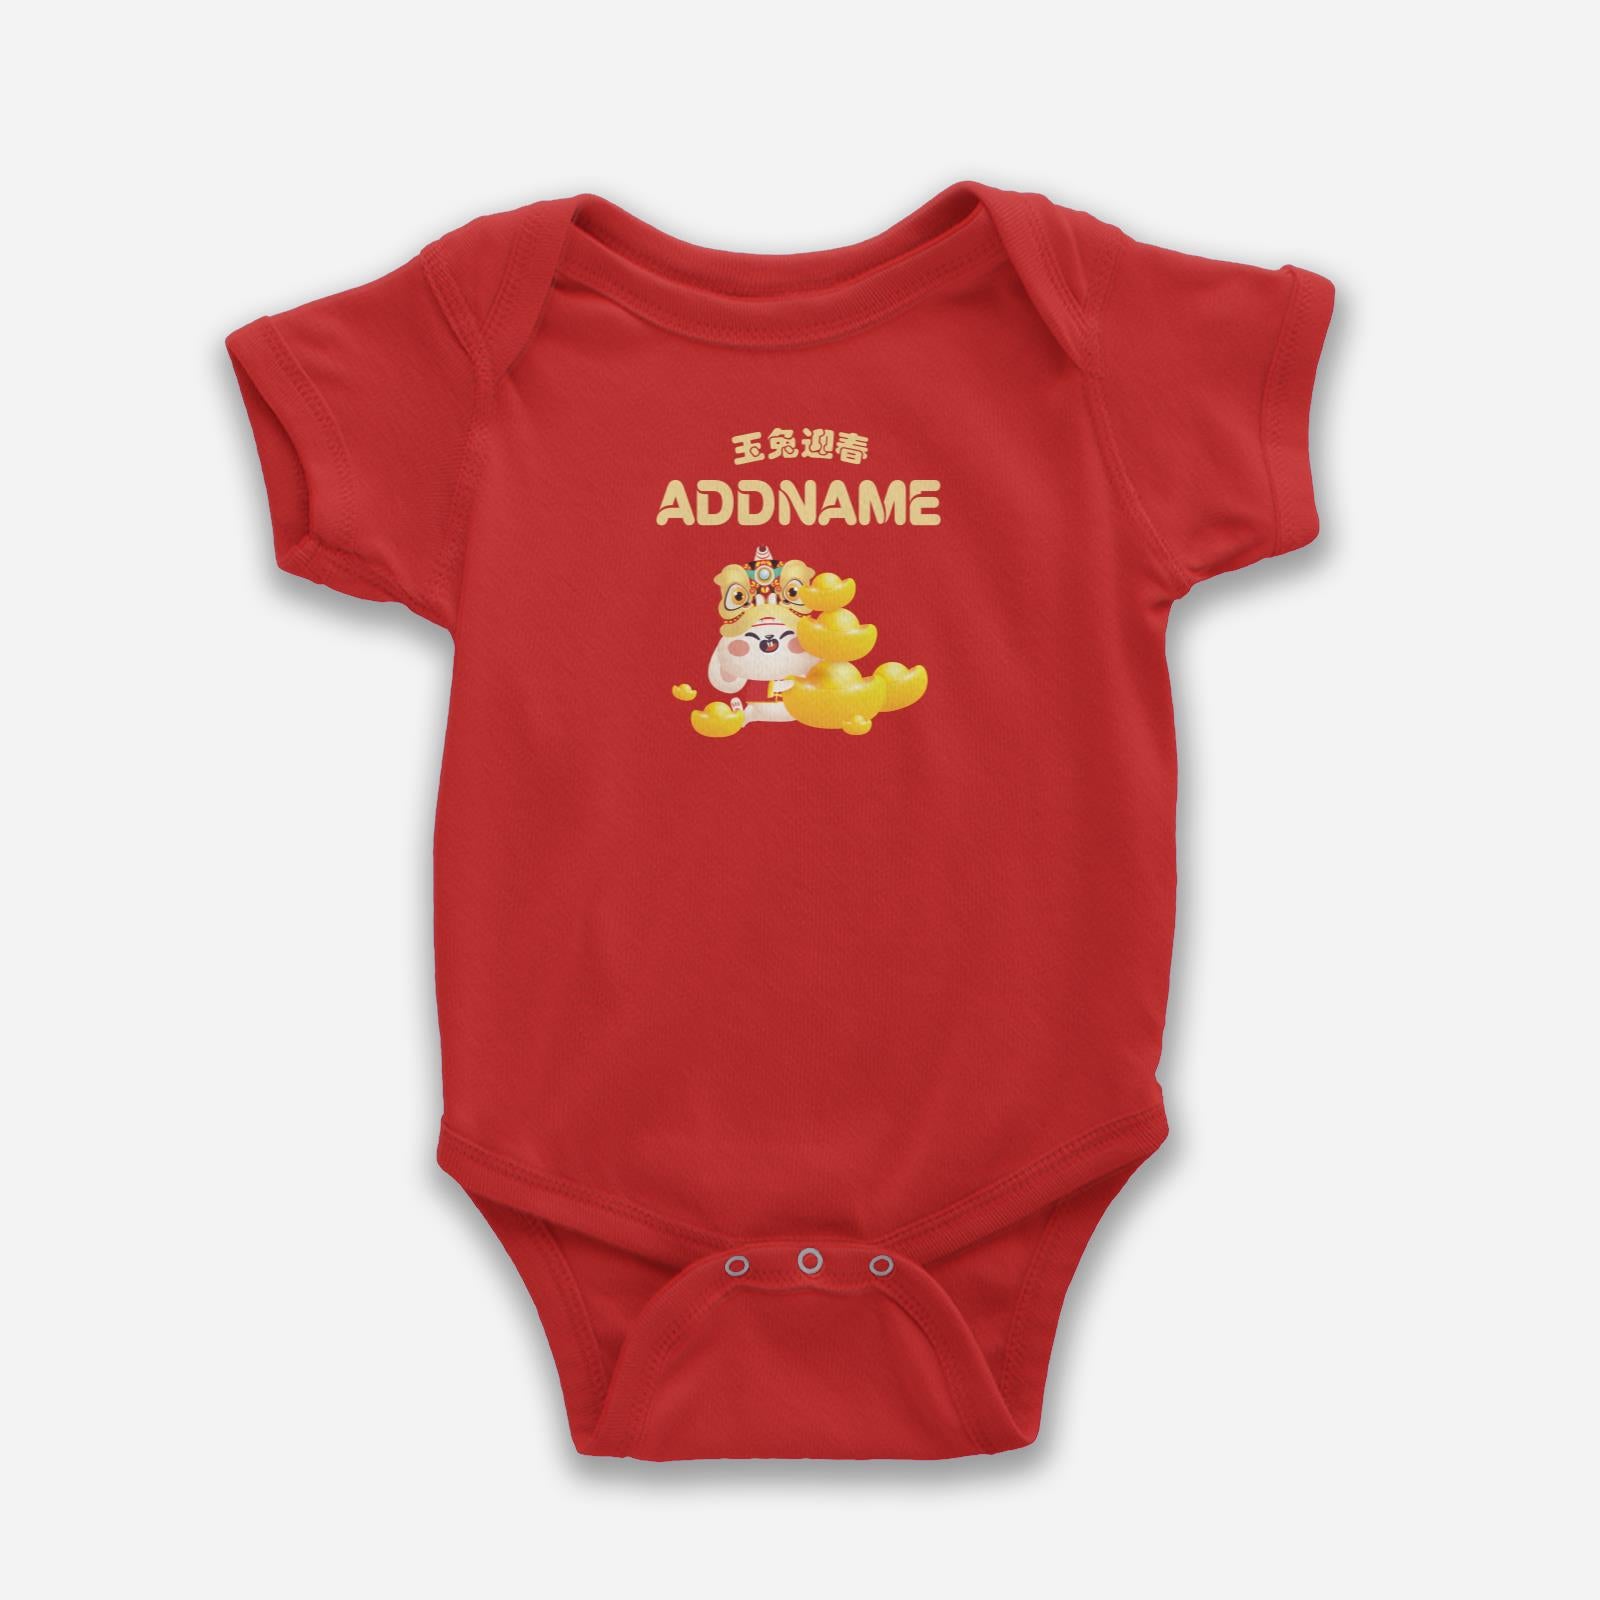 Cny Rabbit Family - Baby Rabbit Baby Romper with English Personalization